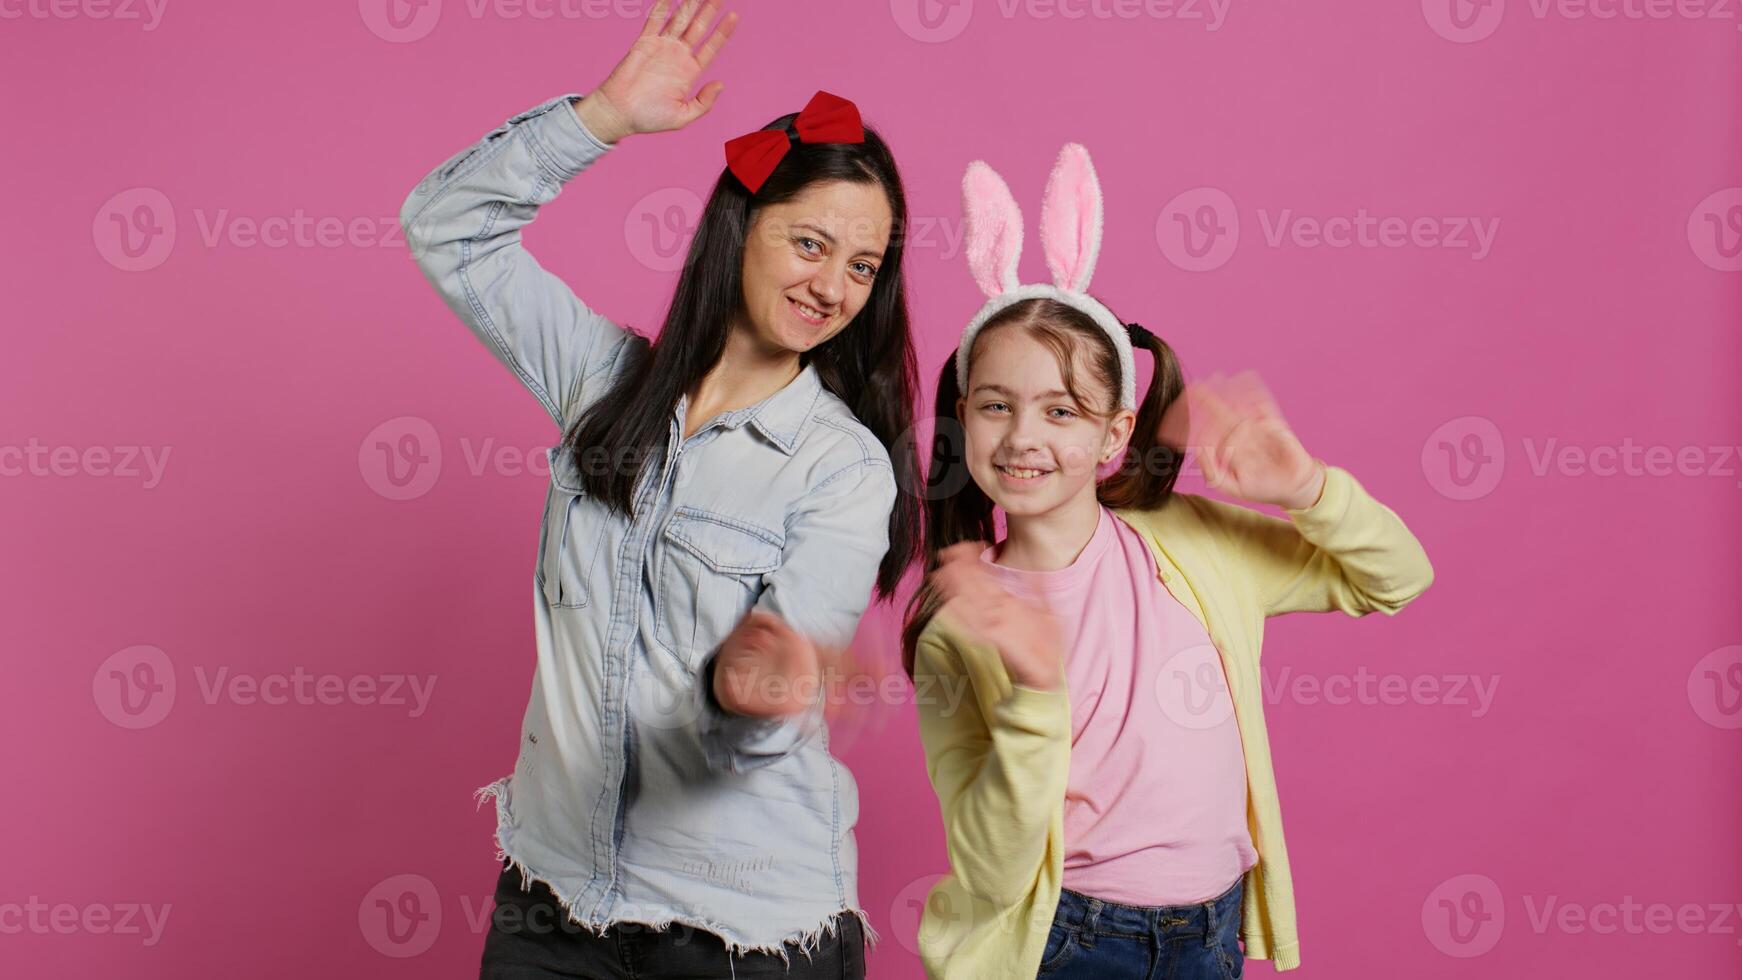 Smiling cheerful mother and little girl waving in front of camera, having fun and enjoying easter holiday celebration. Joyful schoolgirl posing with her mom in studio, saying hello. Camera B. photo